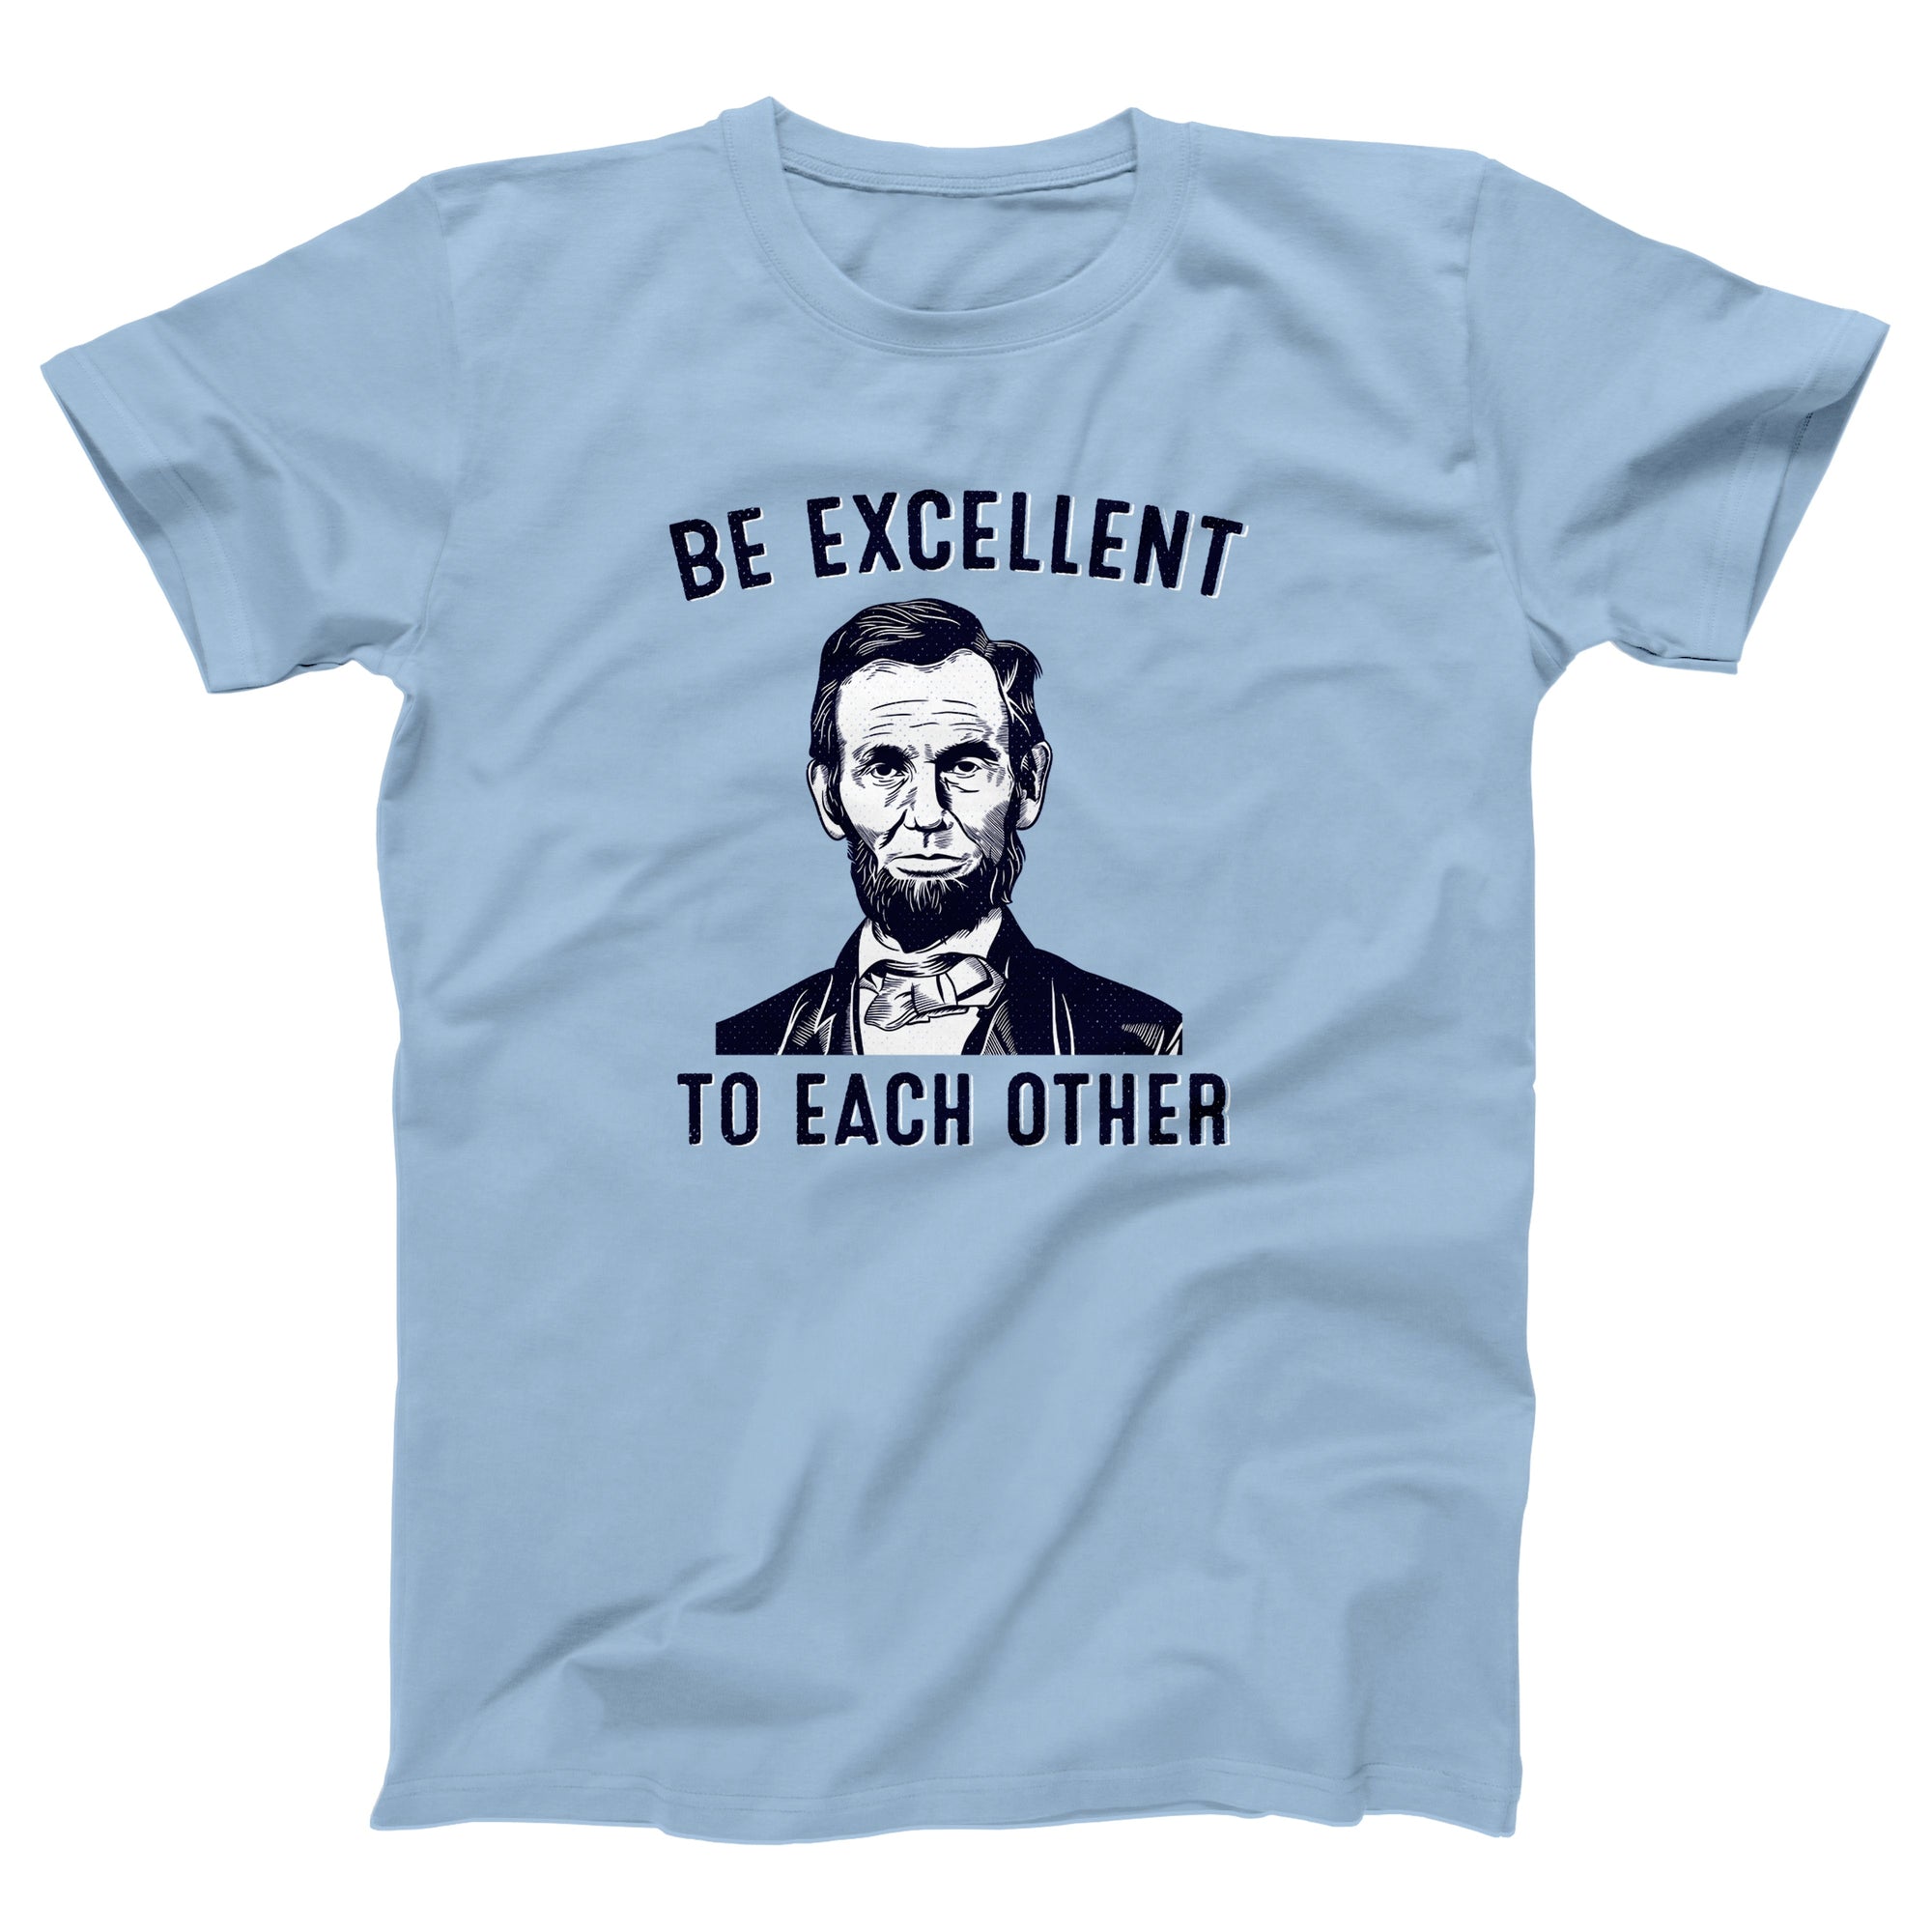 Be Excellent To Each Other Adult Unisex T-Shirt - anishphilip